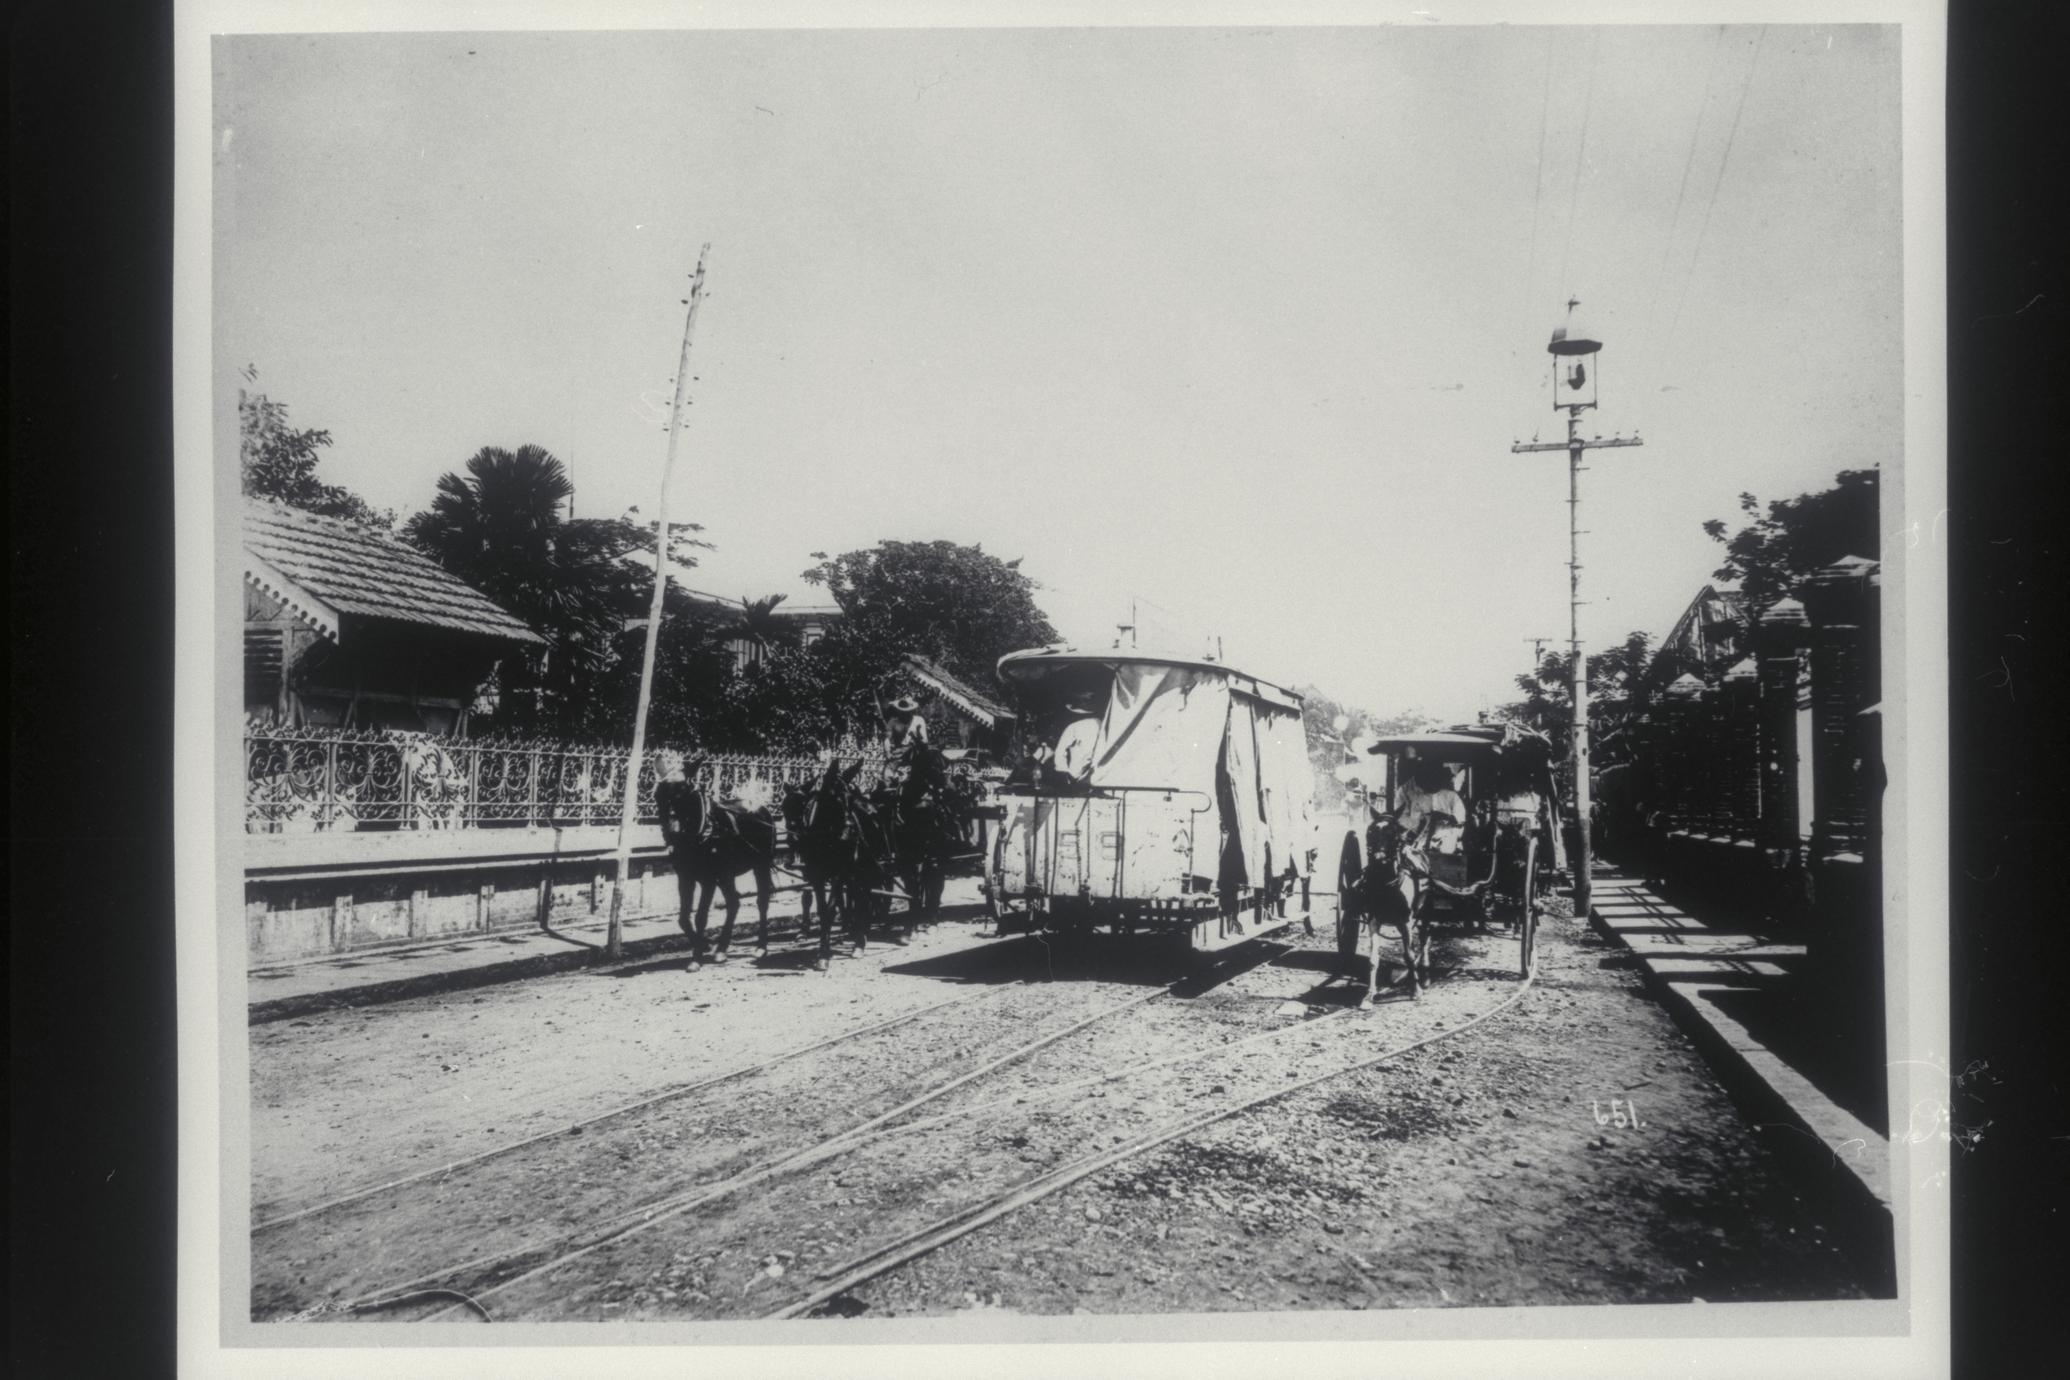 Calle Real, Malate, 1899